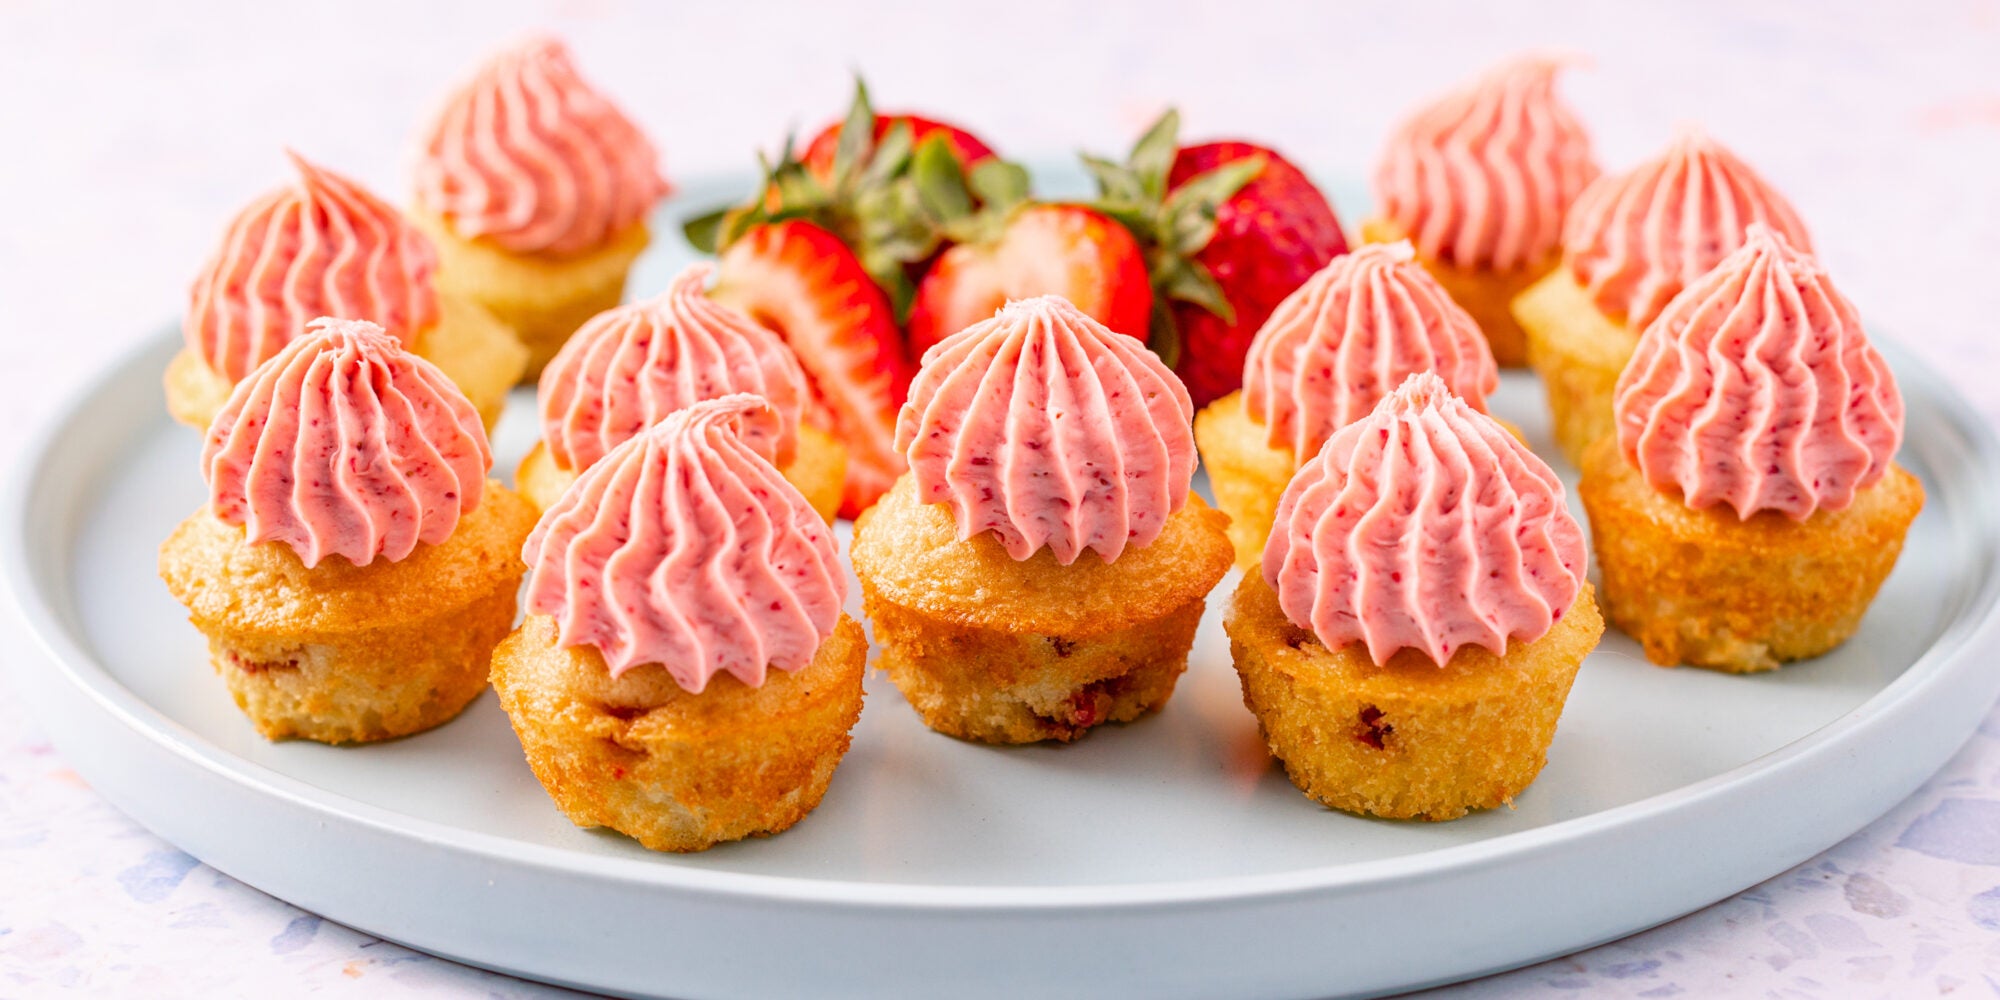 Mini Strawberry Cupcakes with Strawberry Cream Cheese Frosting